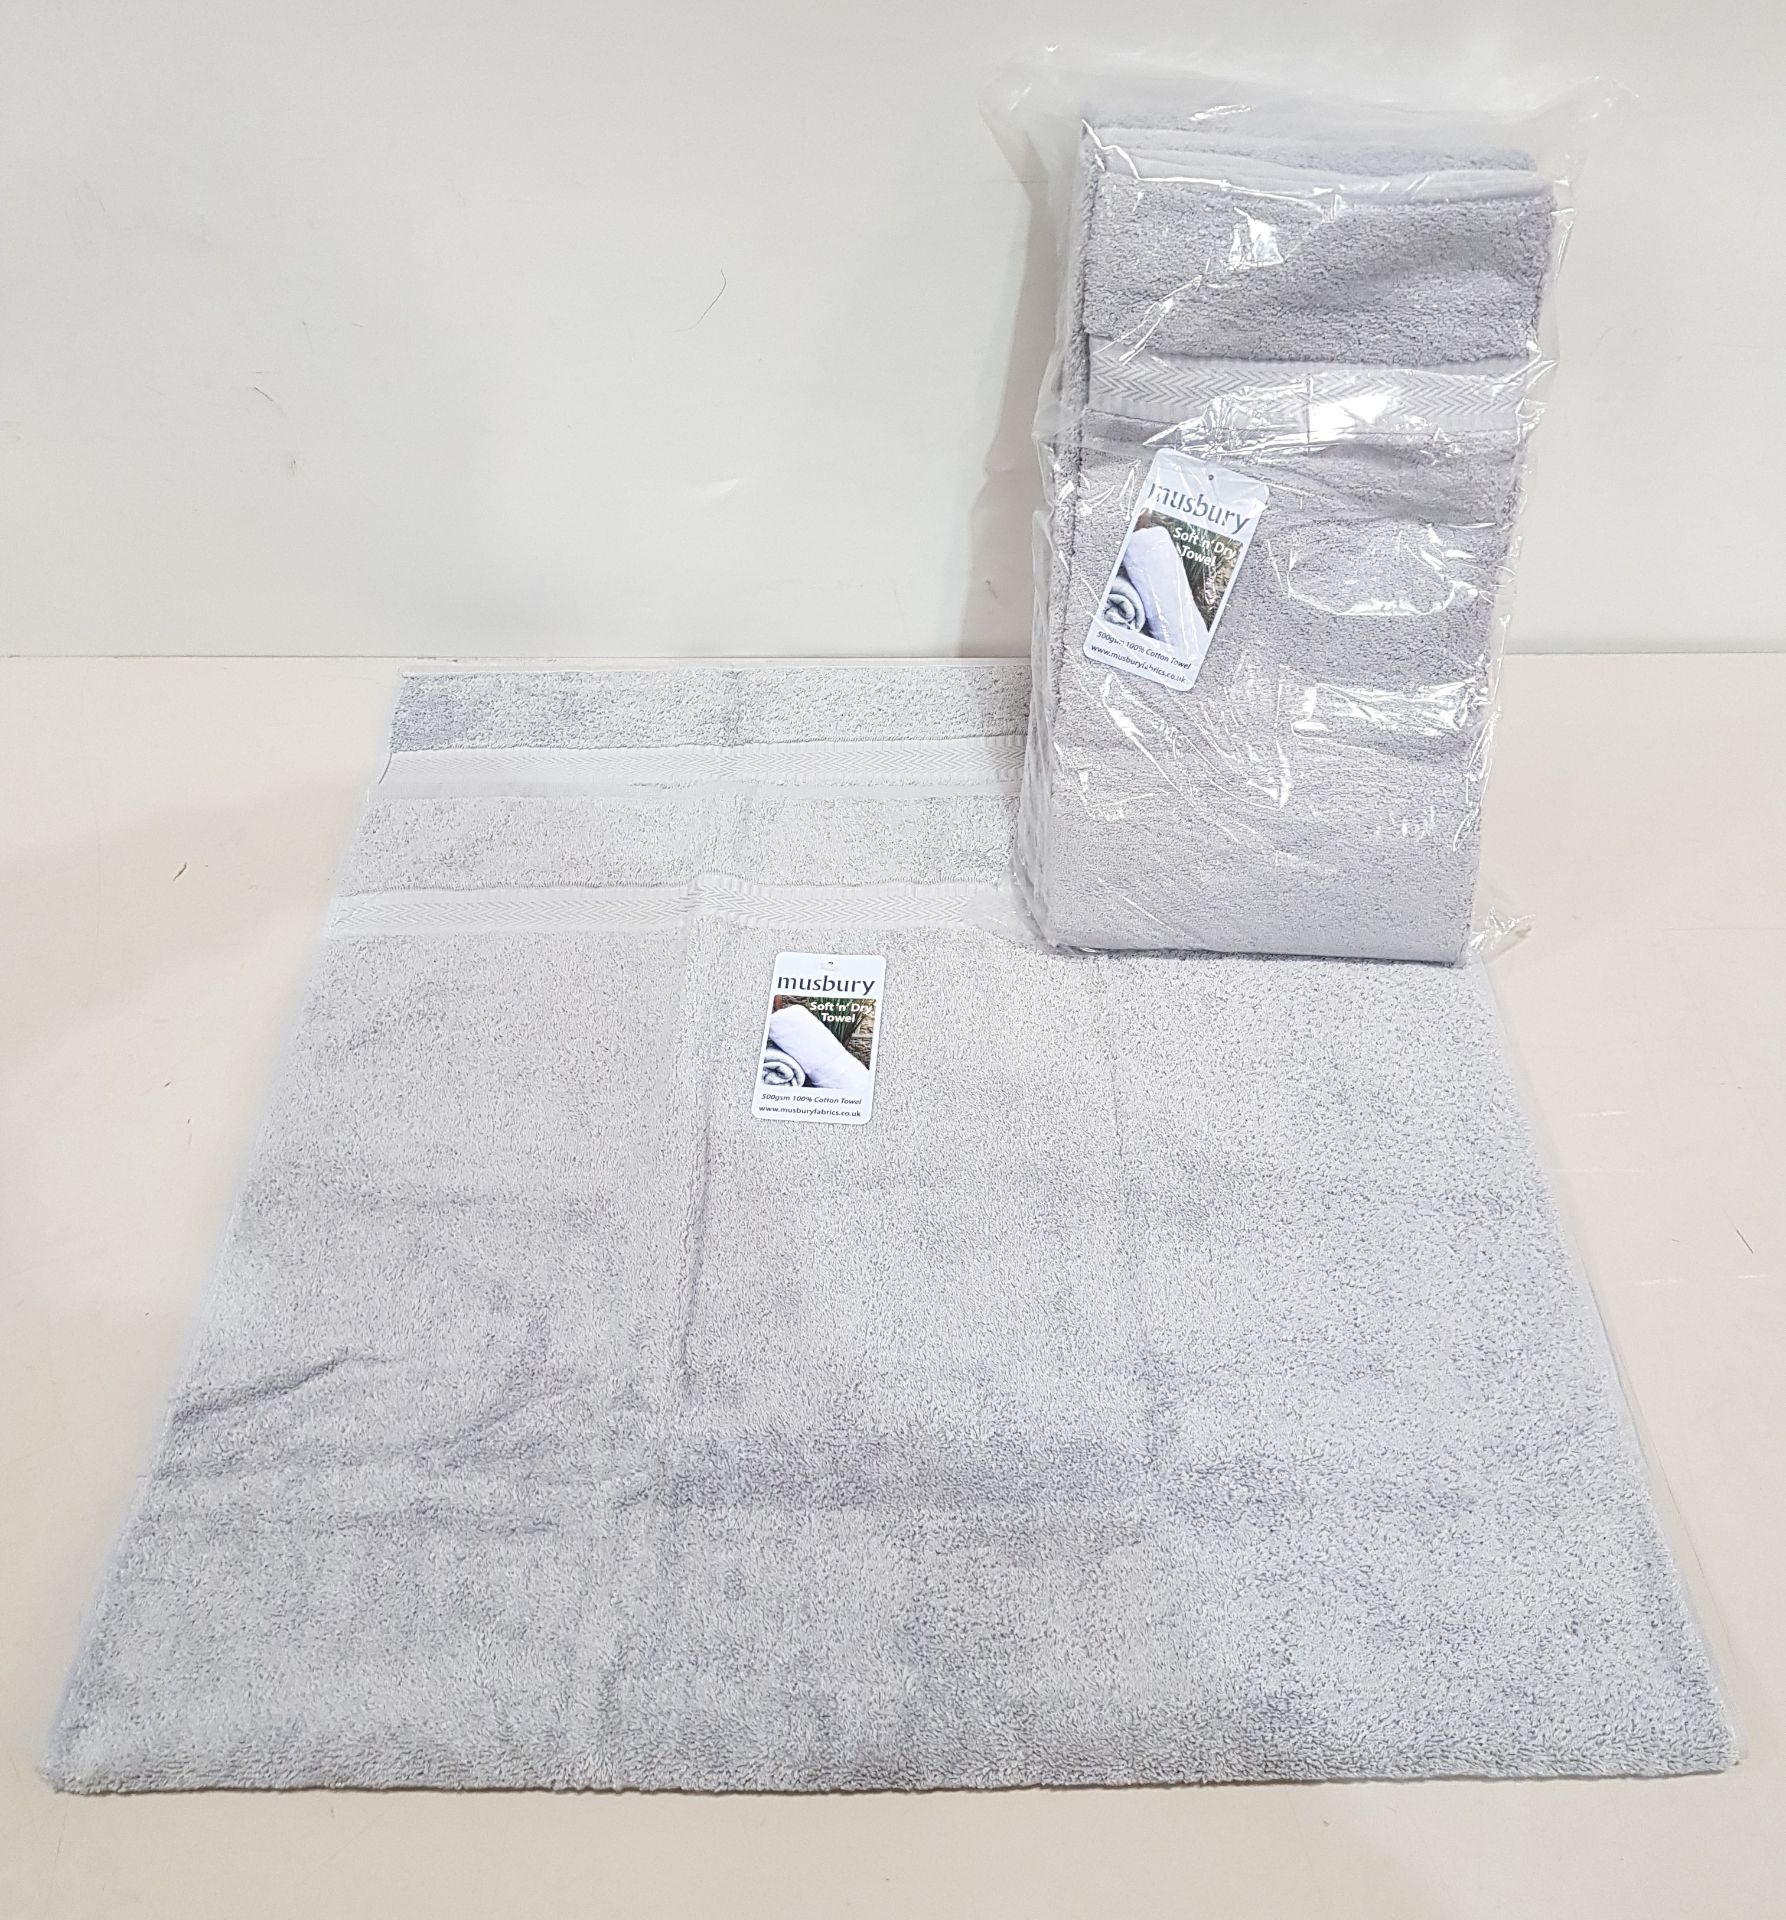 24 X BRAND NEW MUSBURY SOFT 'N' DRY BATH TOWELS IN SILVER COLOUR (SIZE : 70 X 135 CM ) - IN 2 BOX